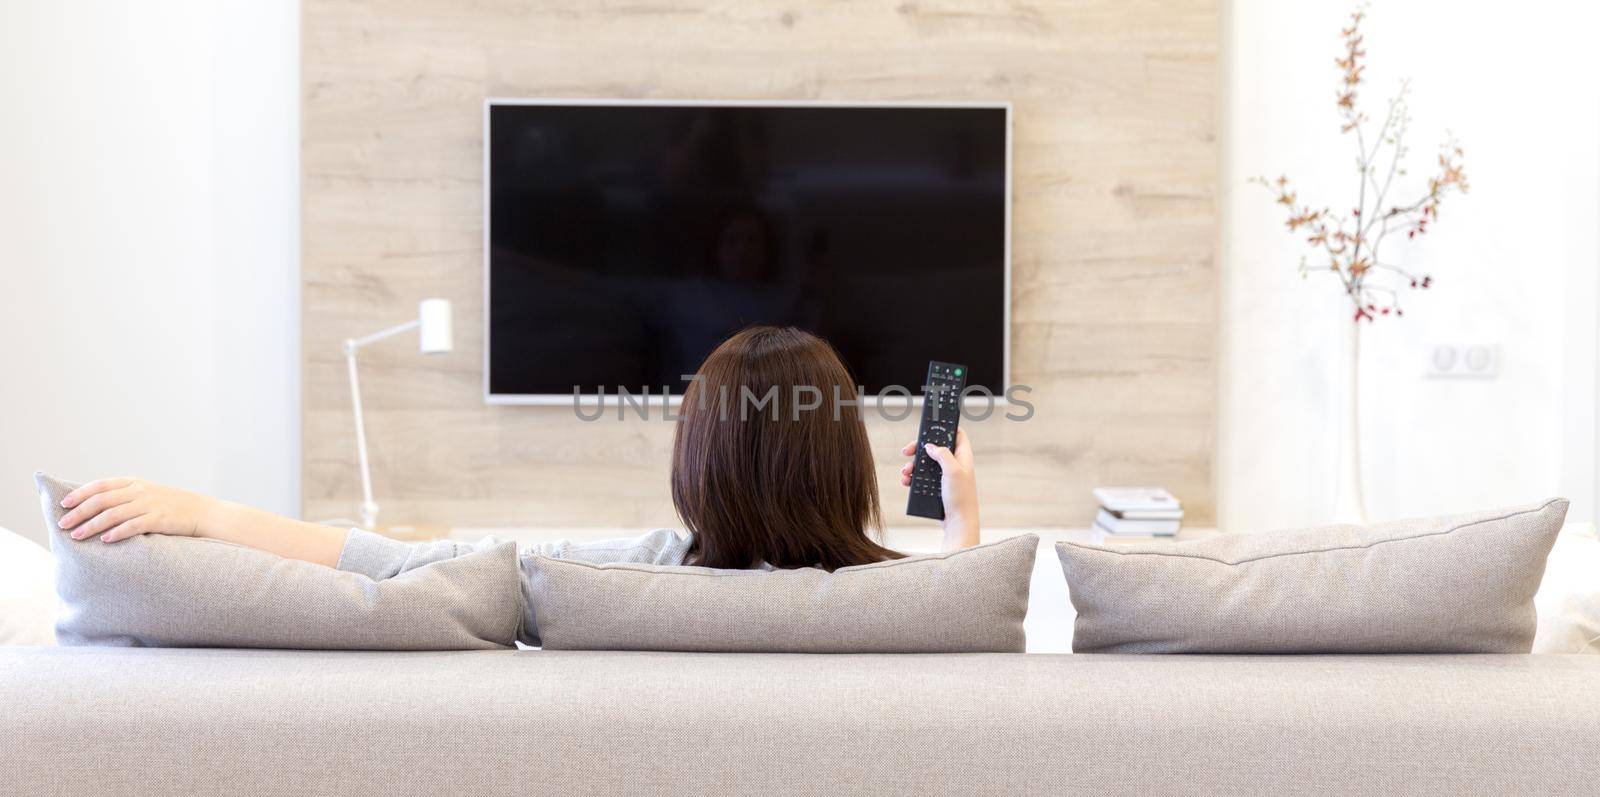 Young woman watching TV in living room, back view